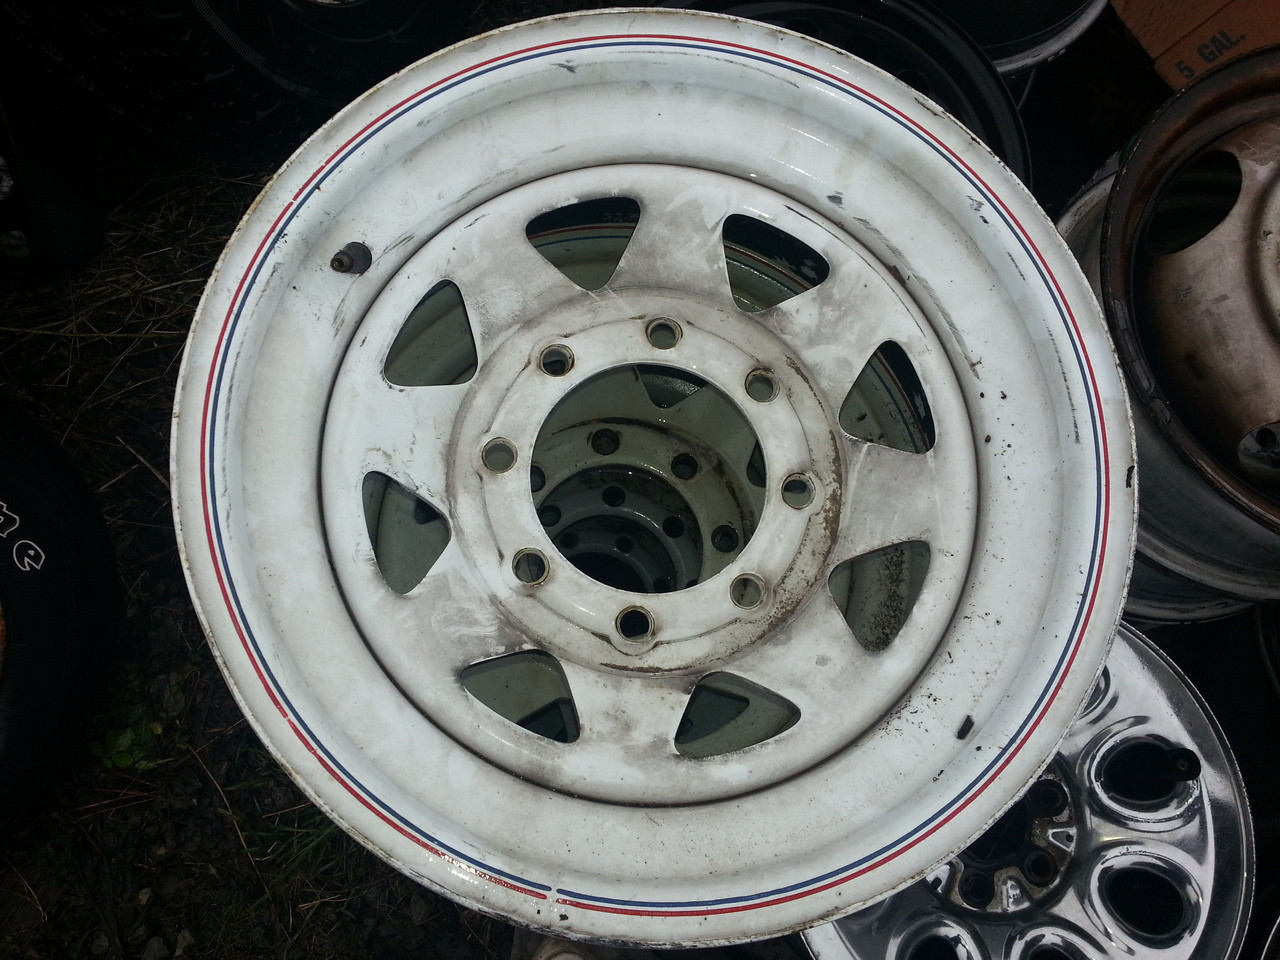 16 Inch 8 Lug Wagon Wheels Chevy, Ford - Dave's Auto Wrecking Are 8 Lug Ford And Chevy The Same